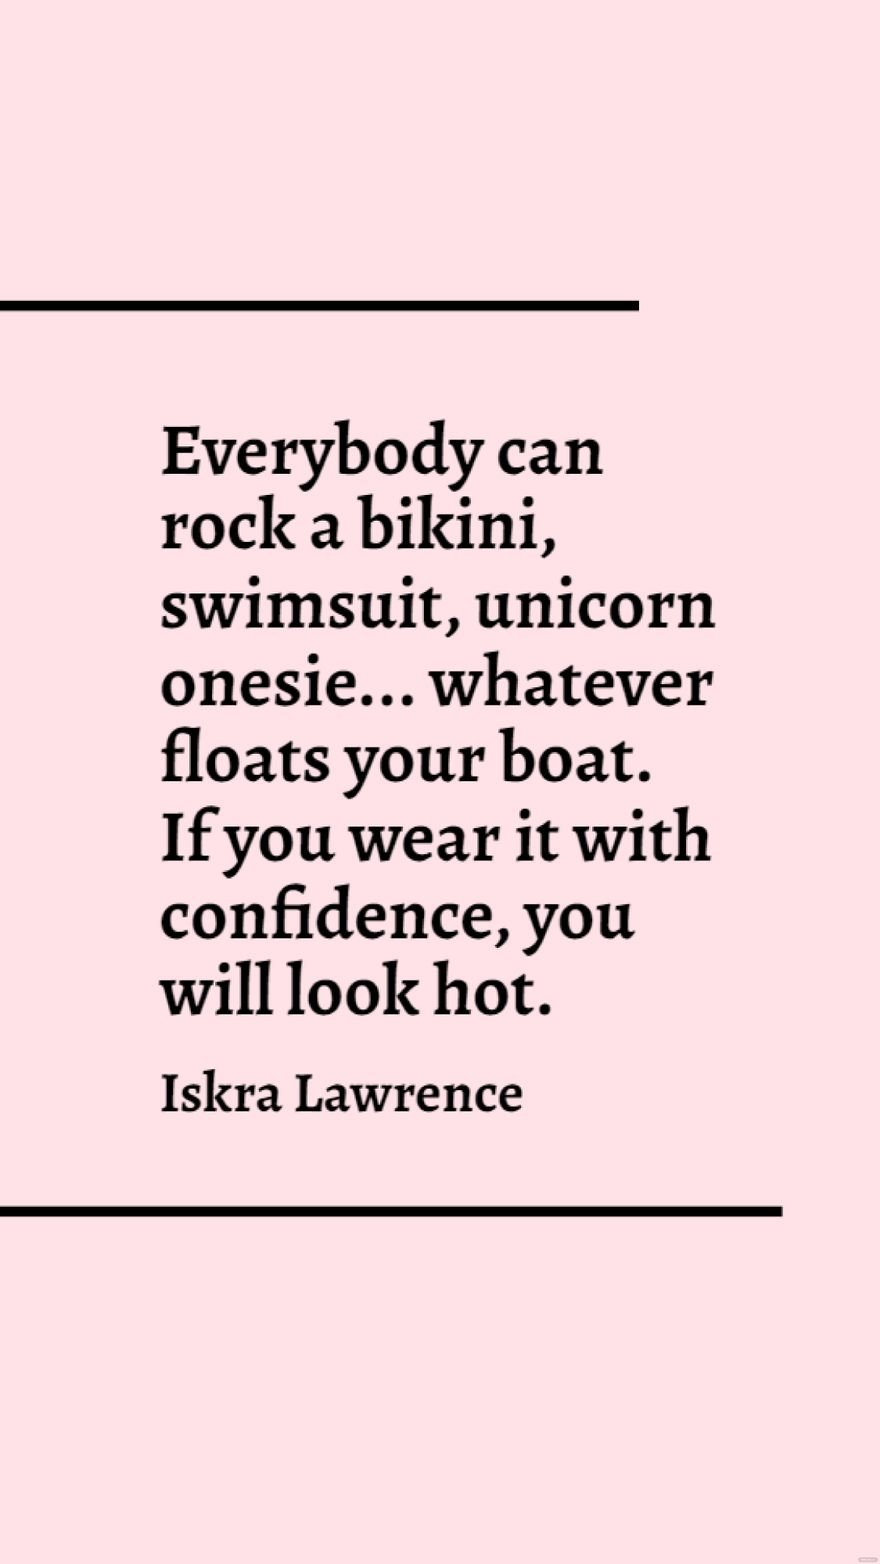 Free Iskra Lawrence - Everybody can rock a bikini, swimsuit, unicorn onesie... whatever floats your boat. If you wear it with confidence, you will look hot.  in JPG